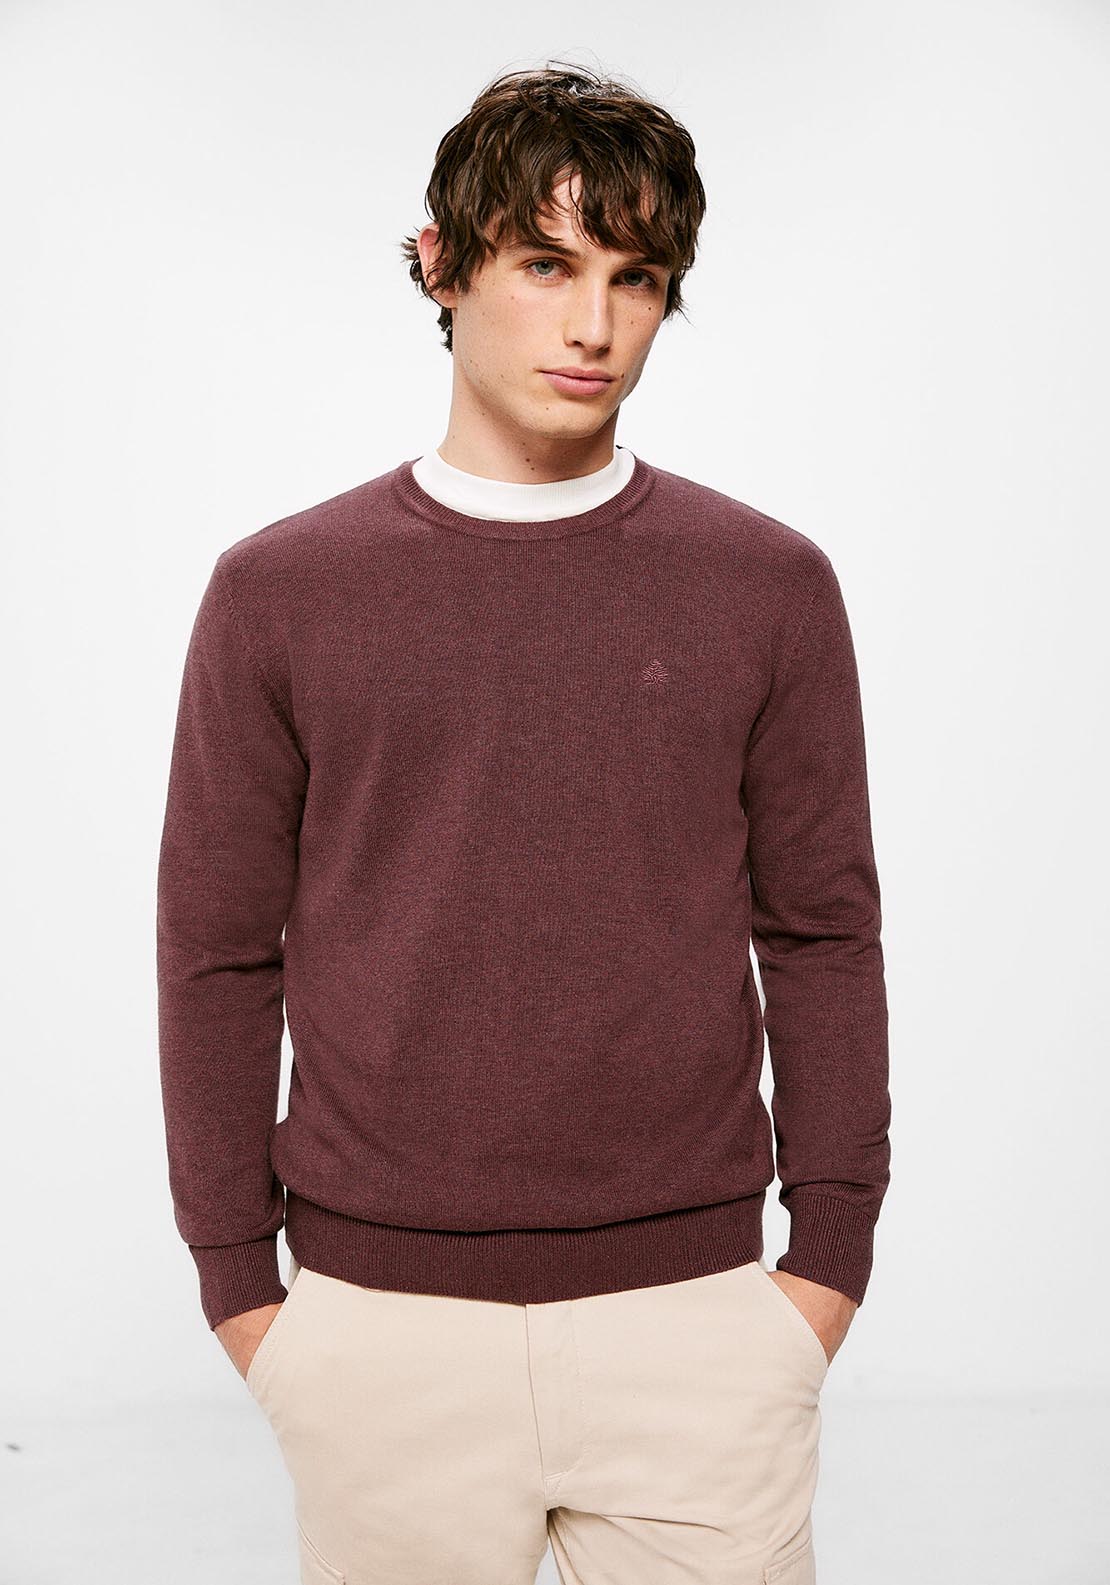 Springfield Essential jumper with elbow patches - Wine 1 Shaws Department Stores